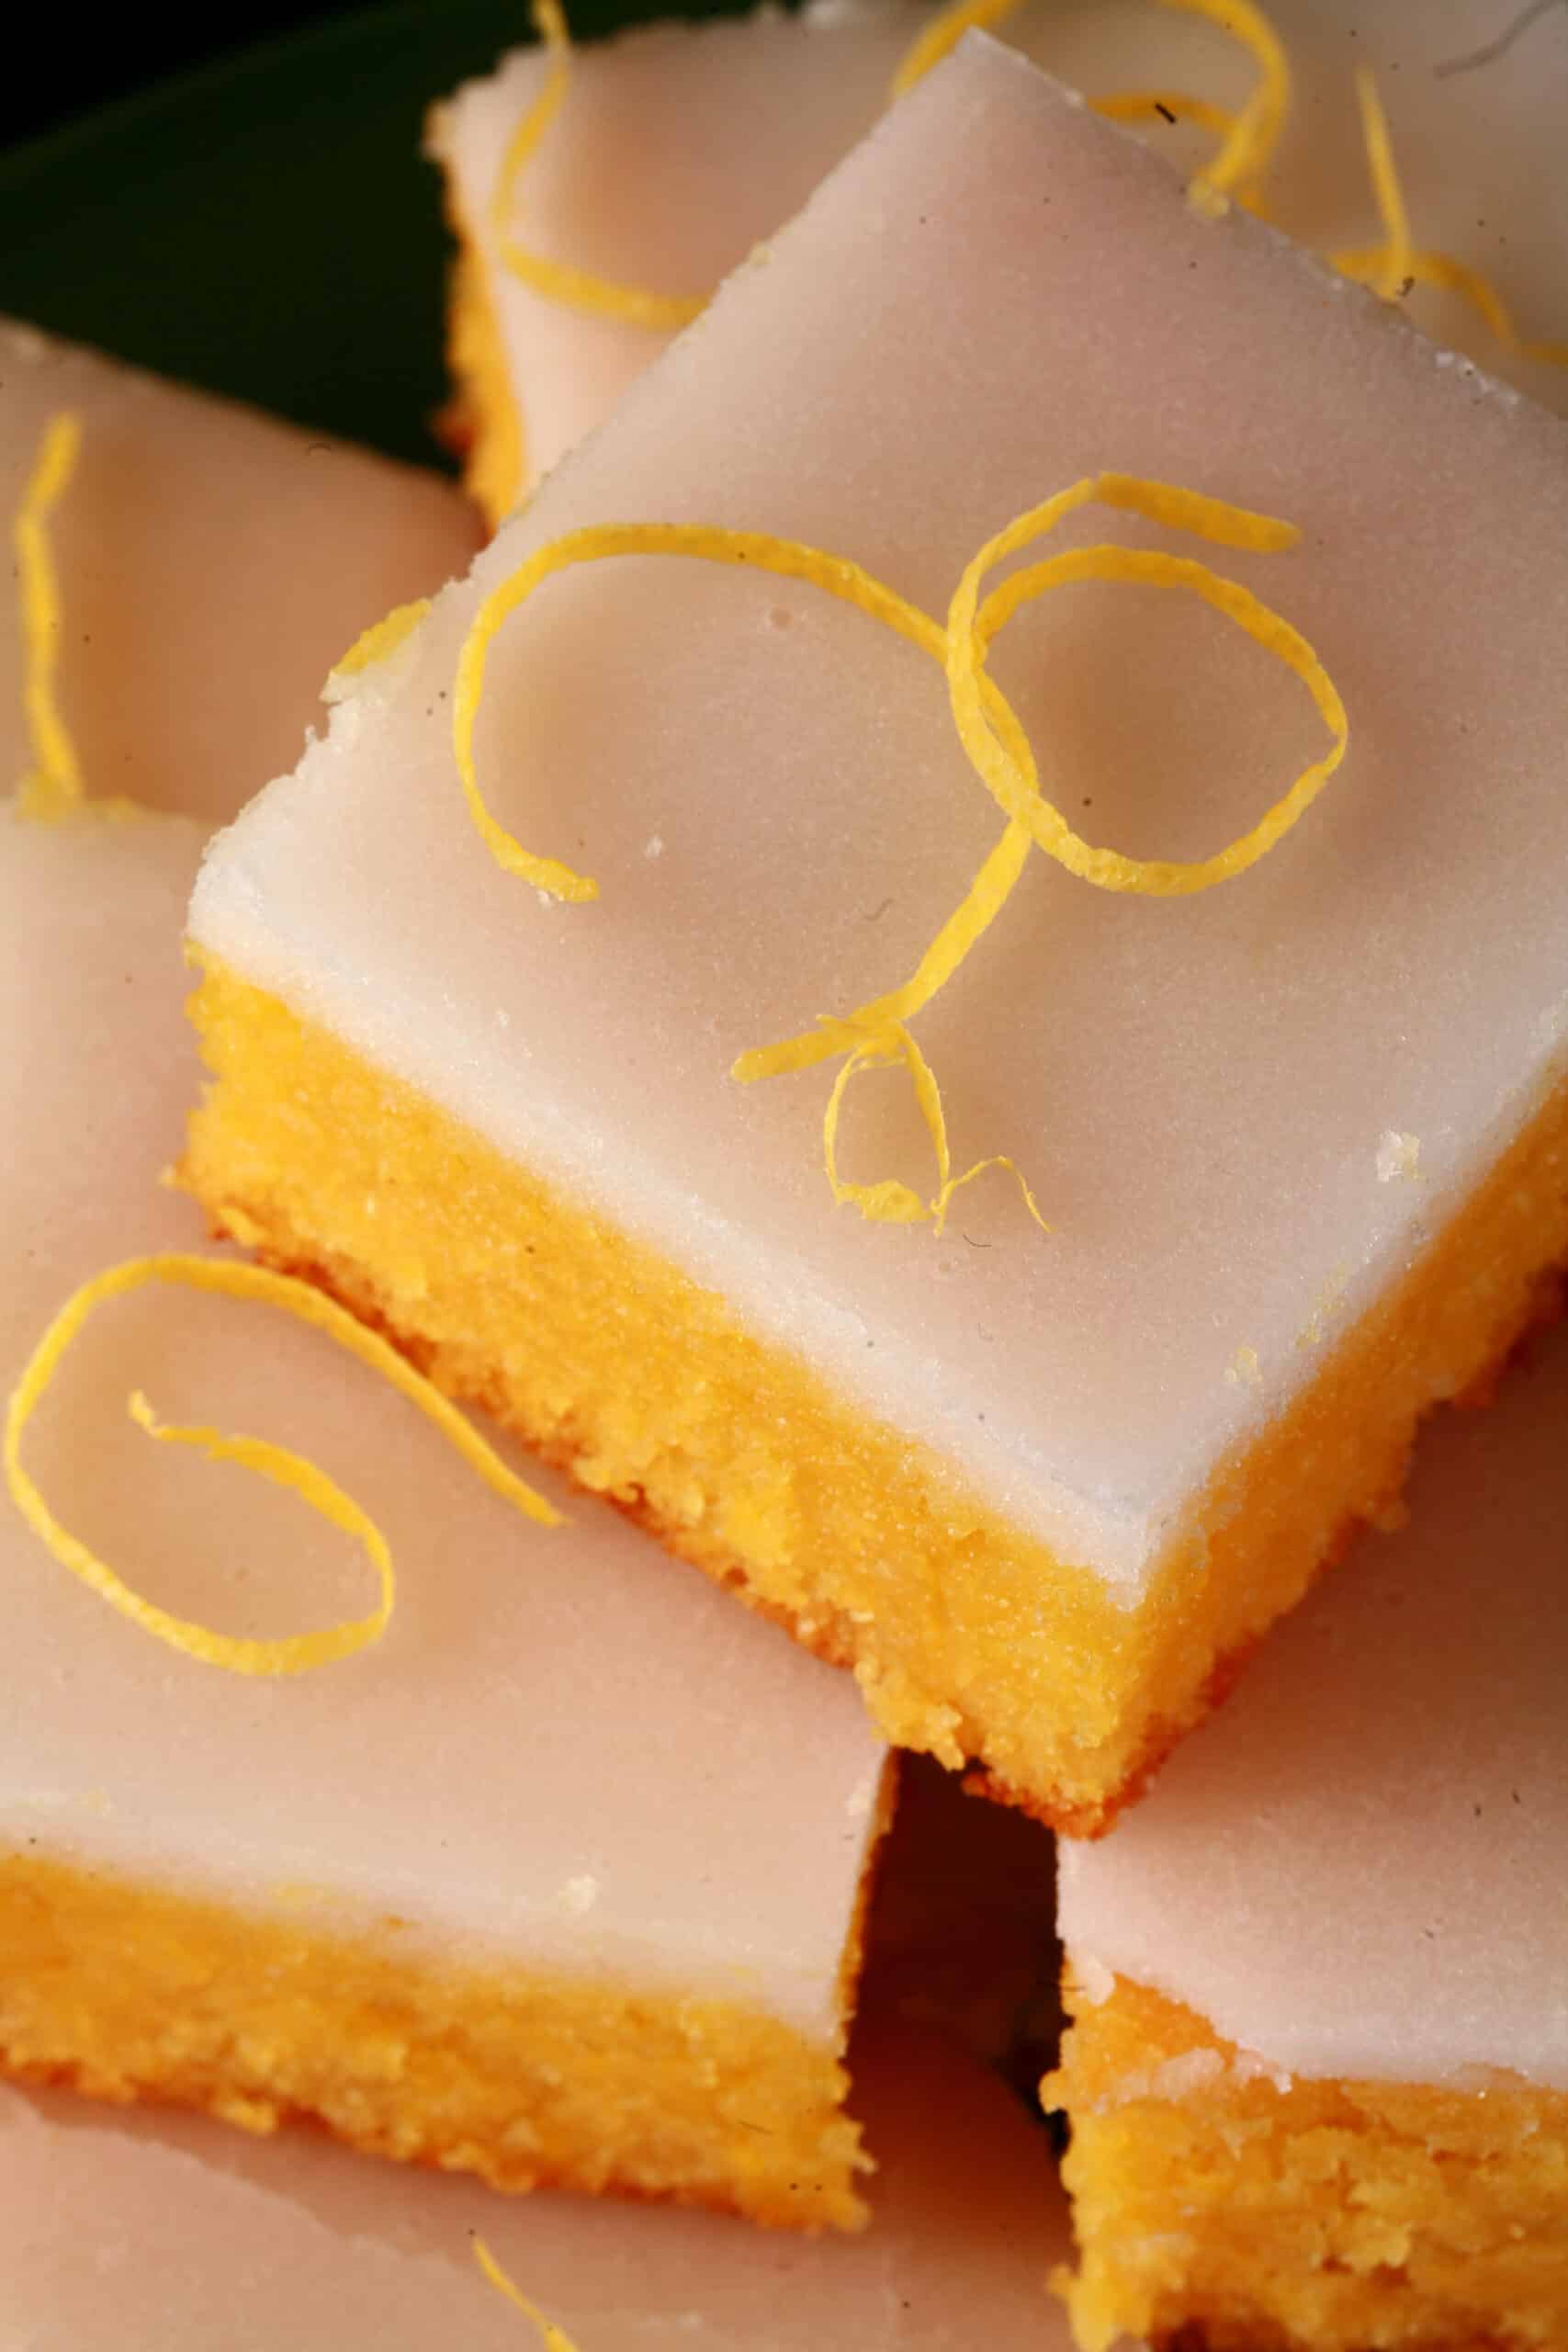 A plate of low carb lemon bars topped with a white glaze.